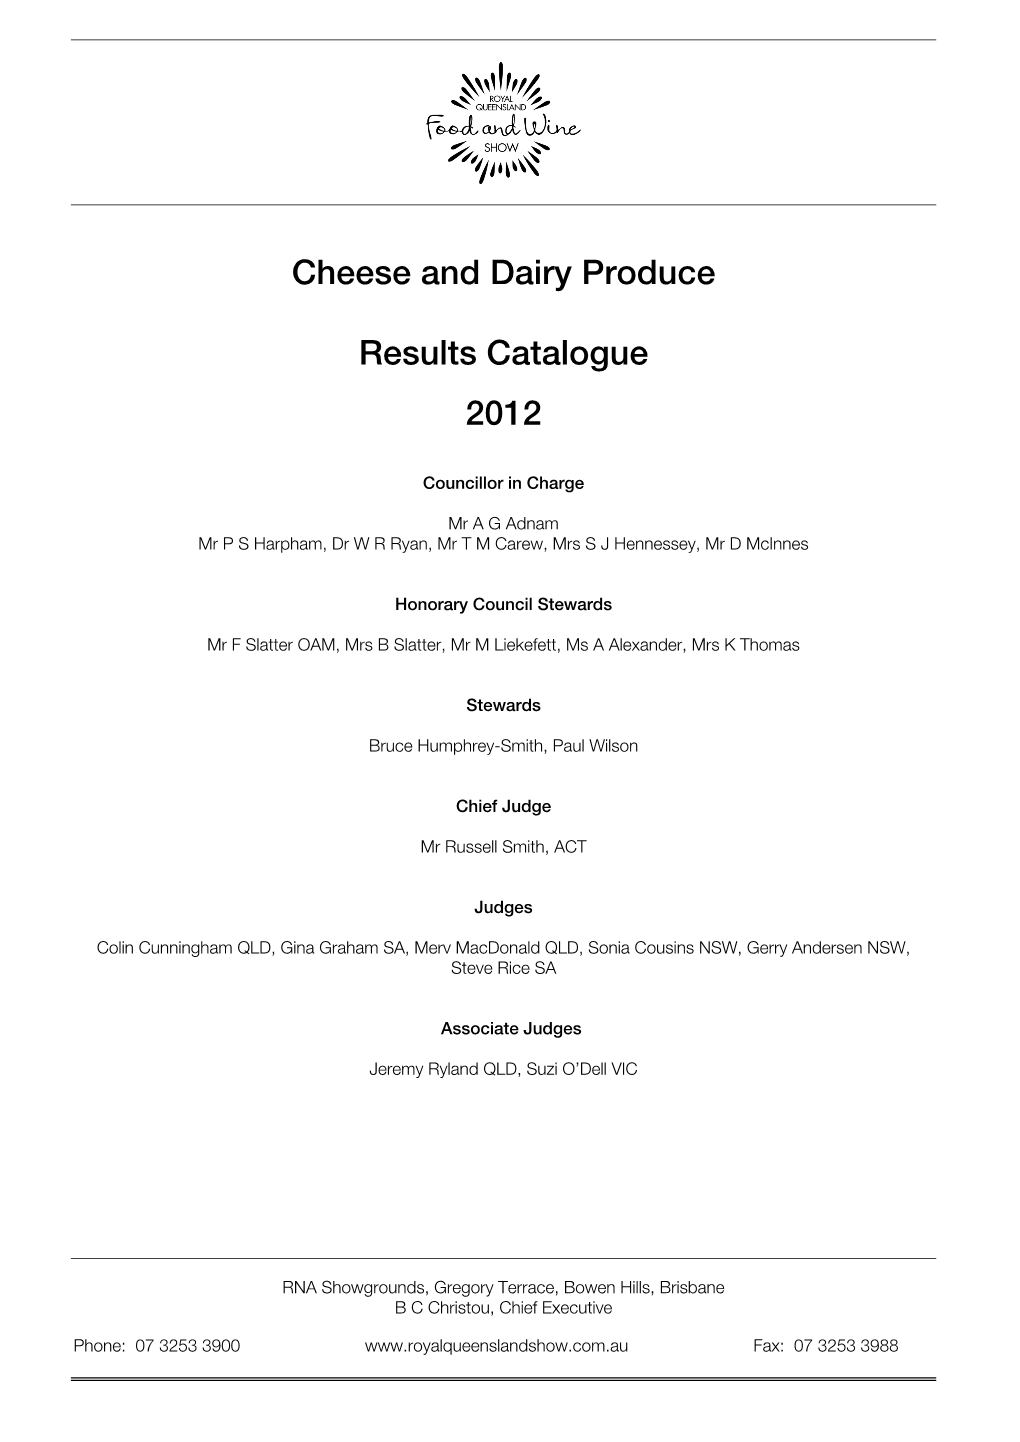 Cheese and Dairy Produce Results Catalogue 2012